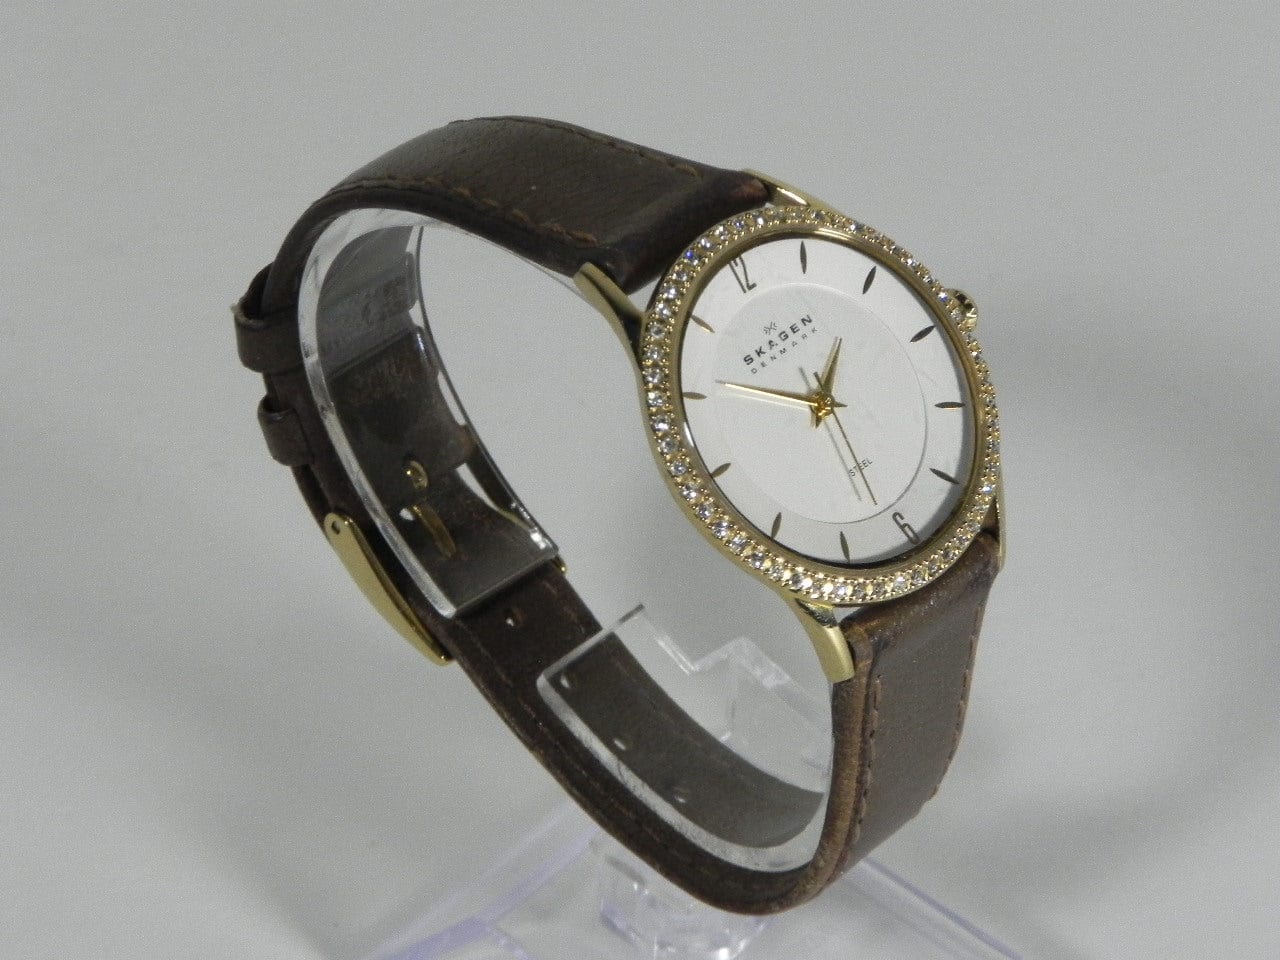 I Like Mike's Mid Century Modern Watches Skagen Women's Gold Toned Round Watch, Jeweled, Brown Leather Band